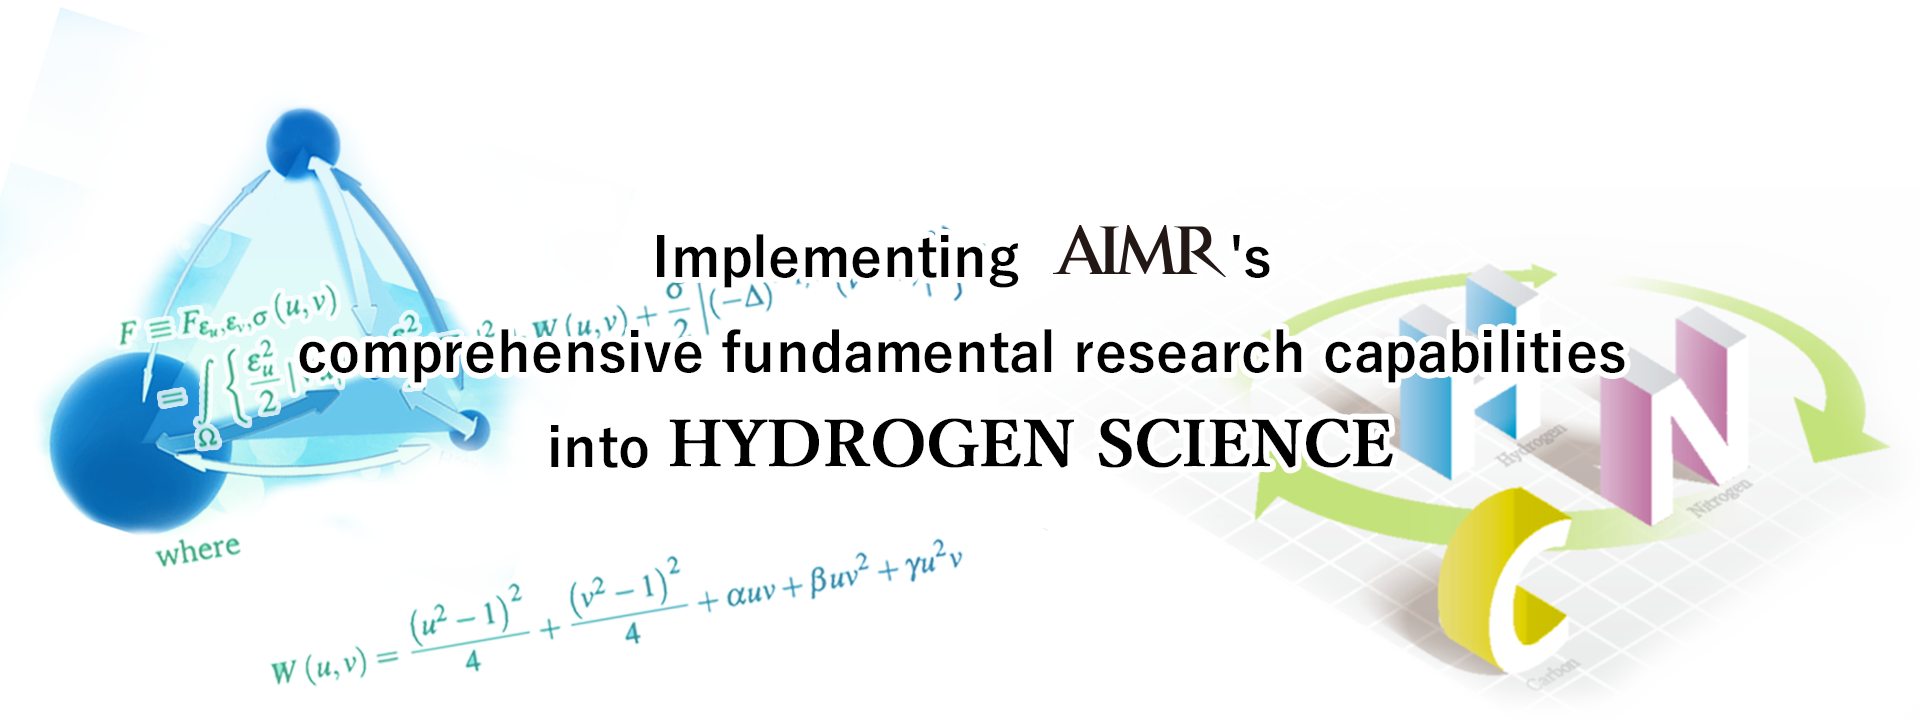 Implementing AIMR's comprehensive fundamental research capabilities into hydrogen science